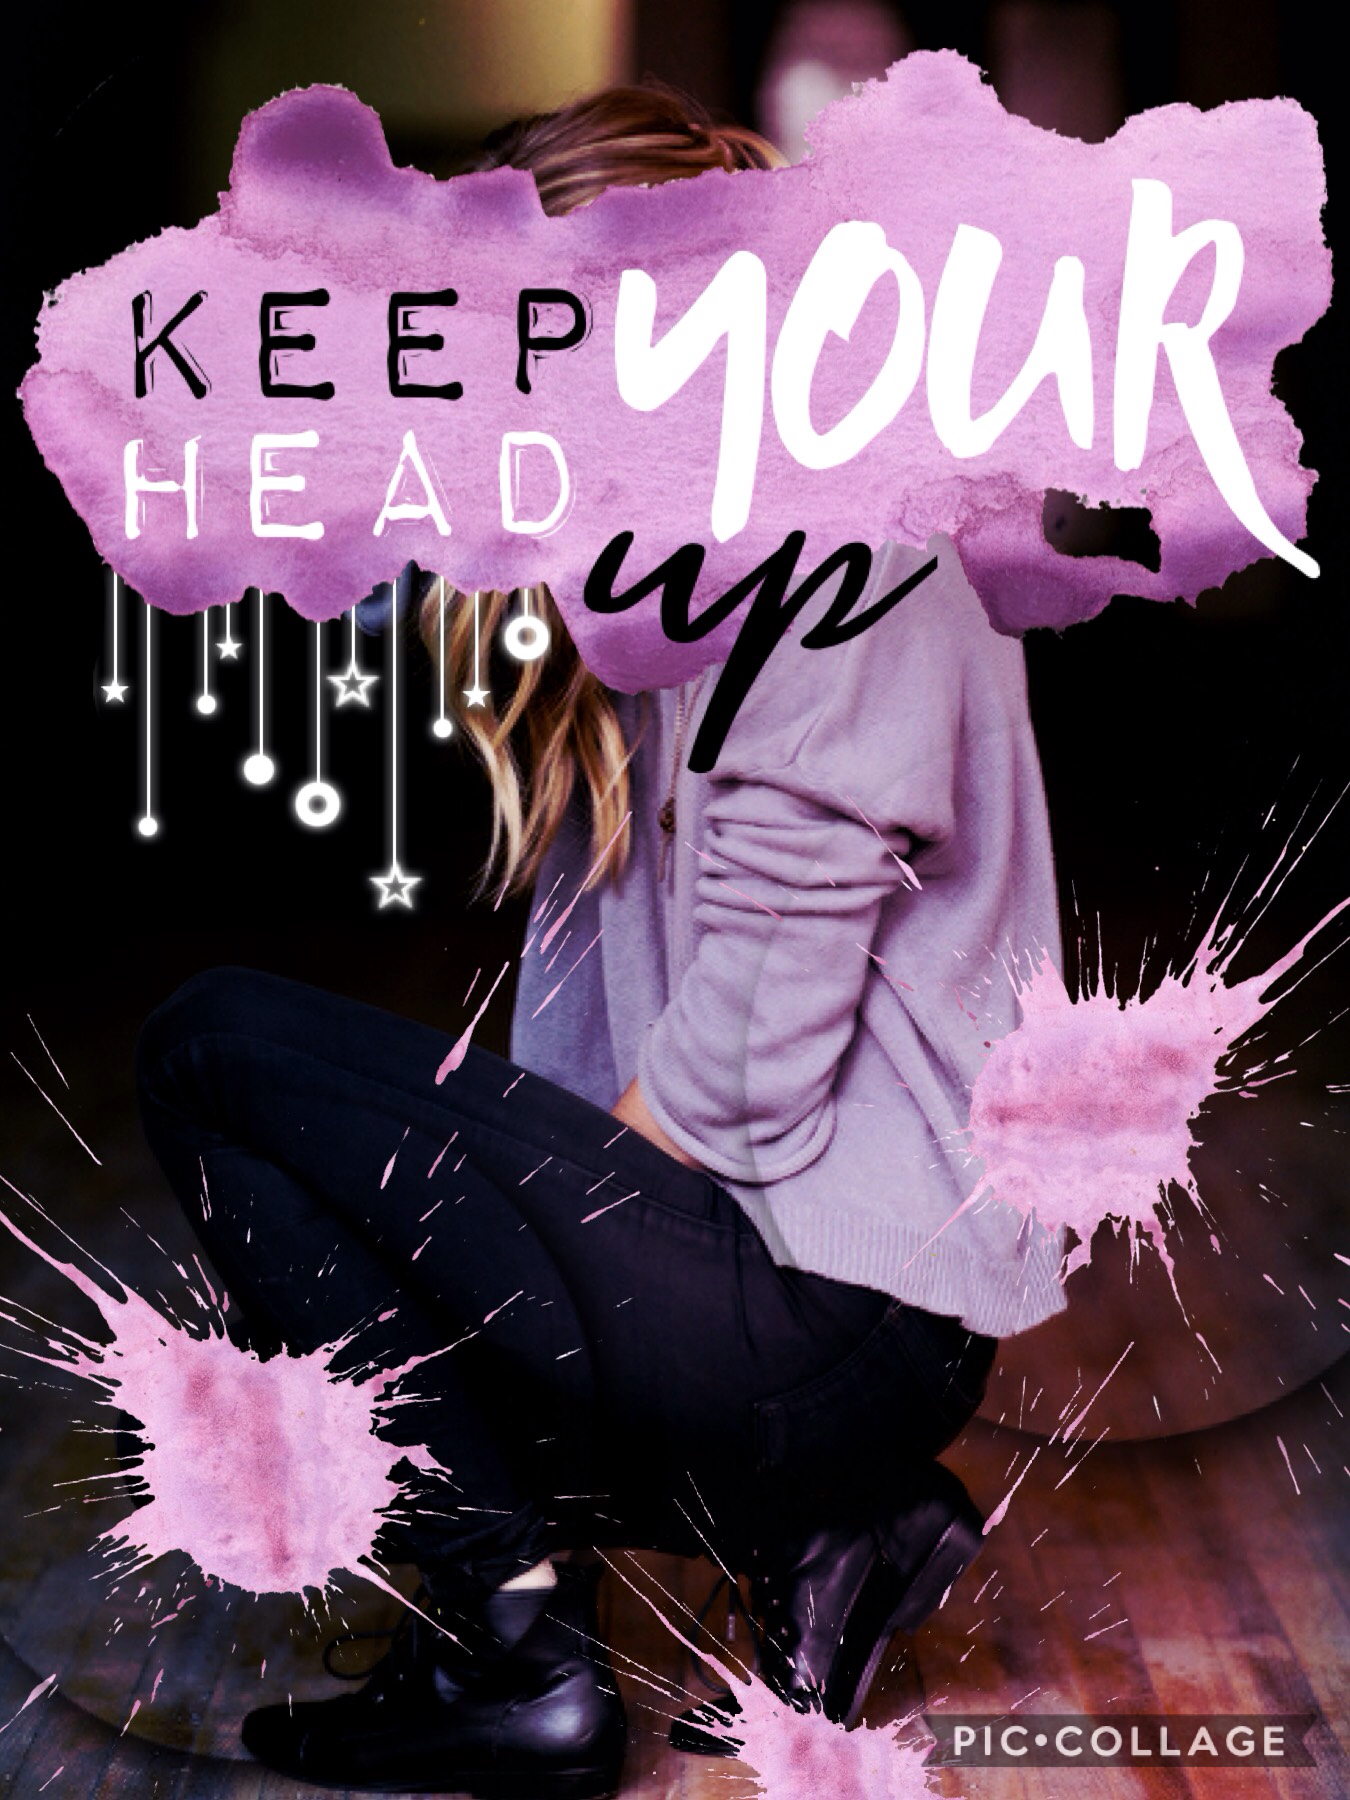 Keep Your Head Up